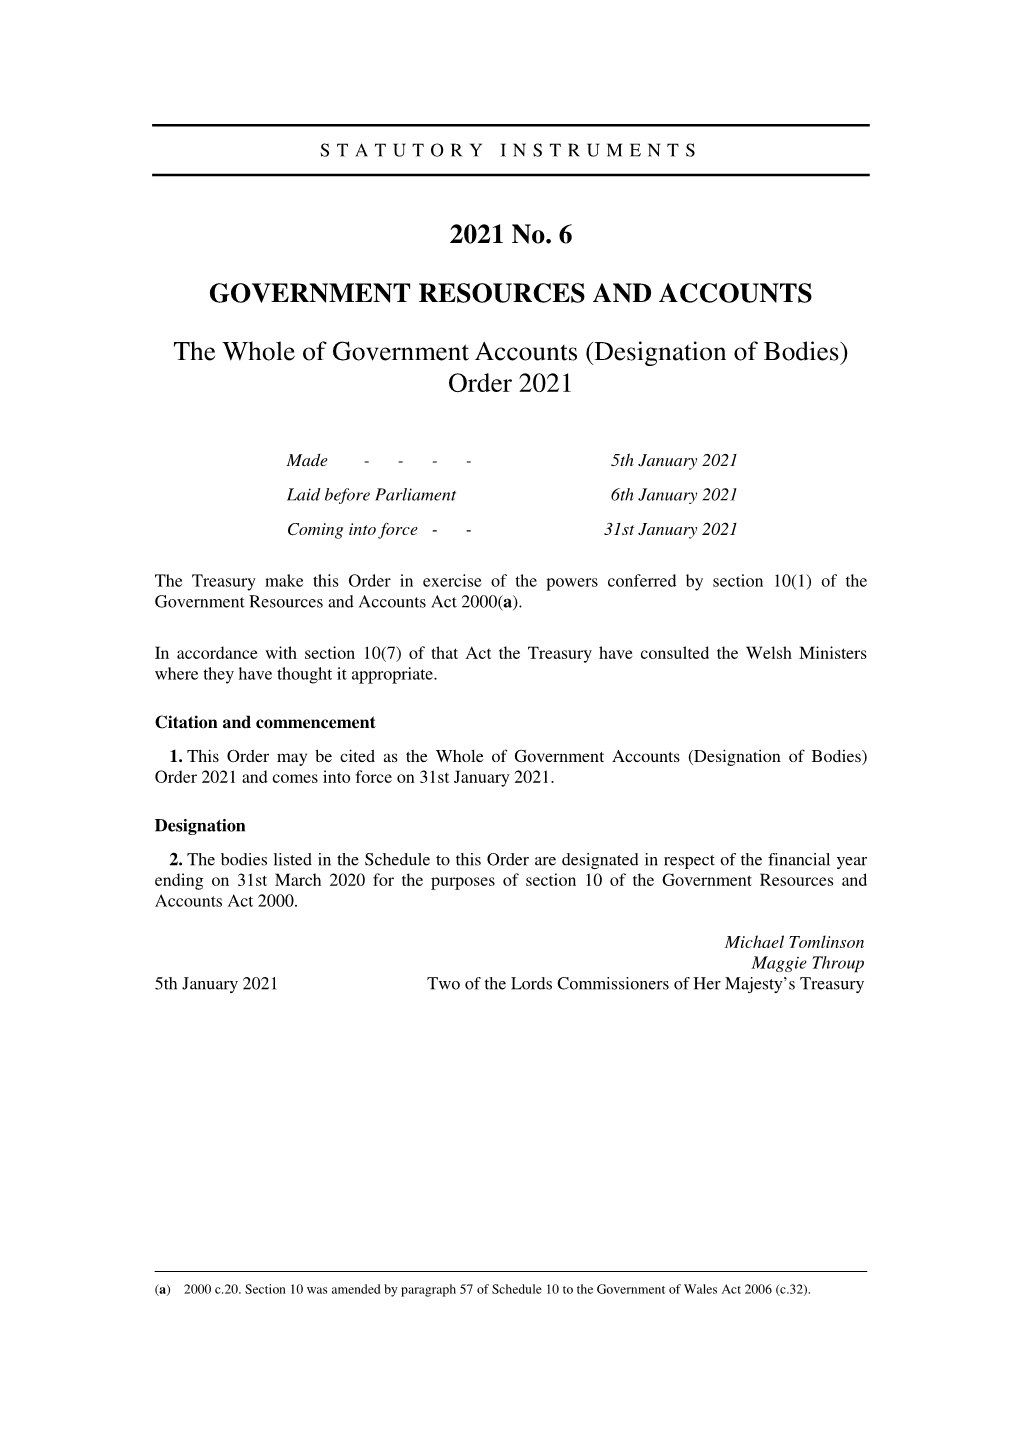 The Whole of Government Accounts (Designation of Bodies) Order 2021